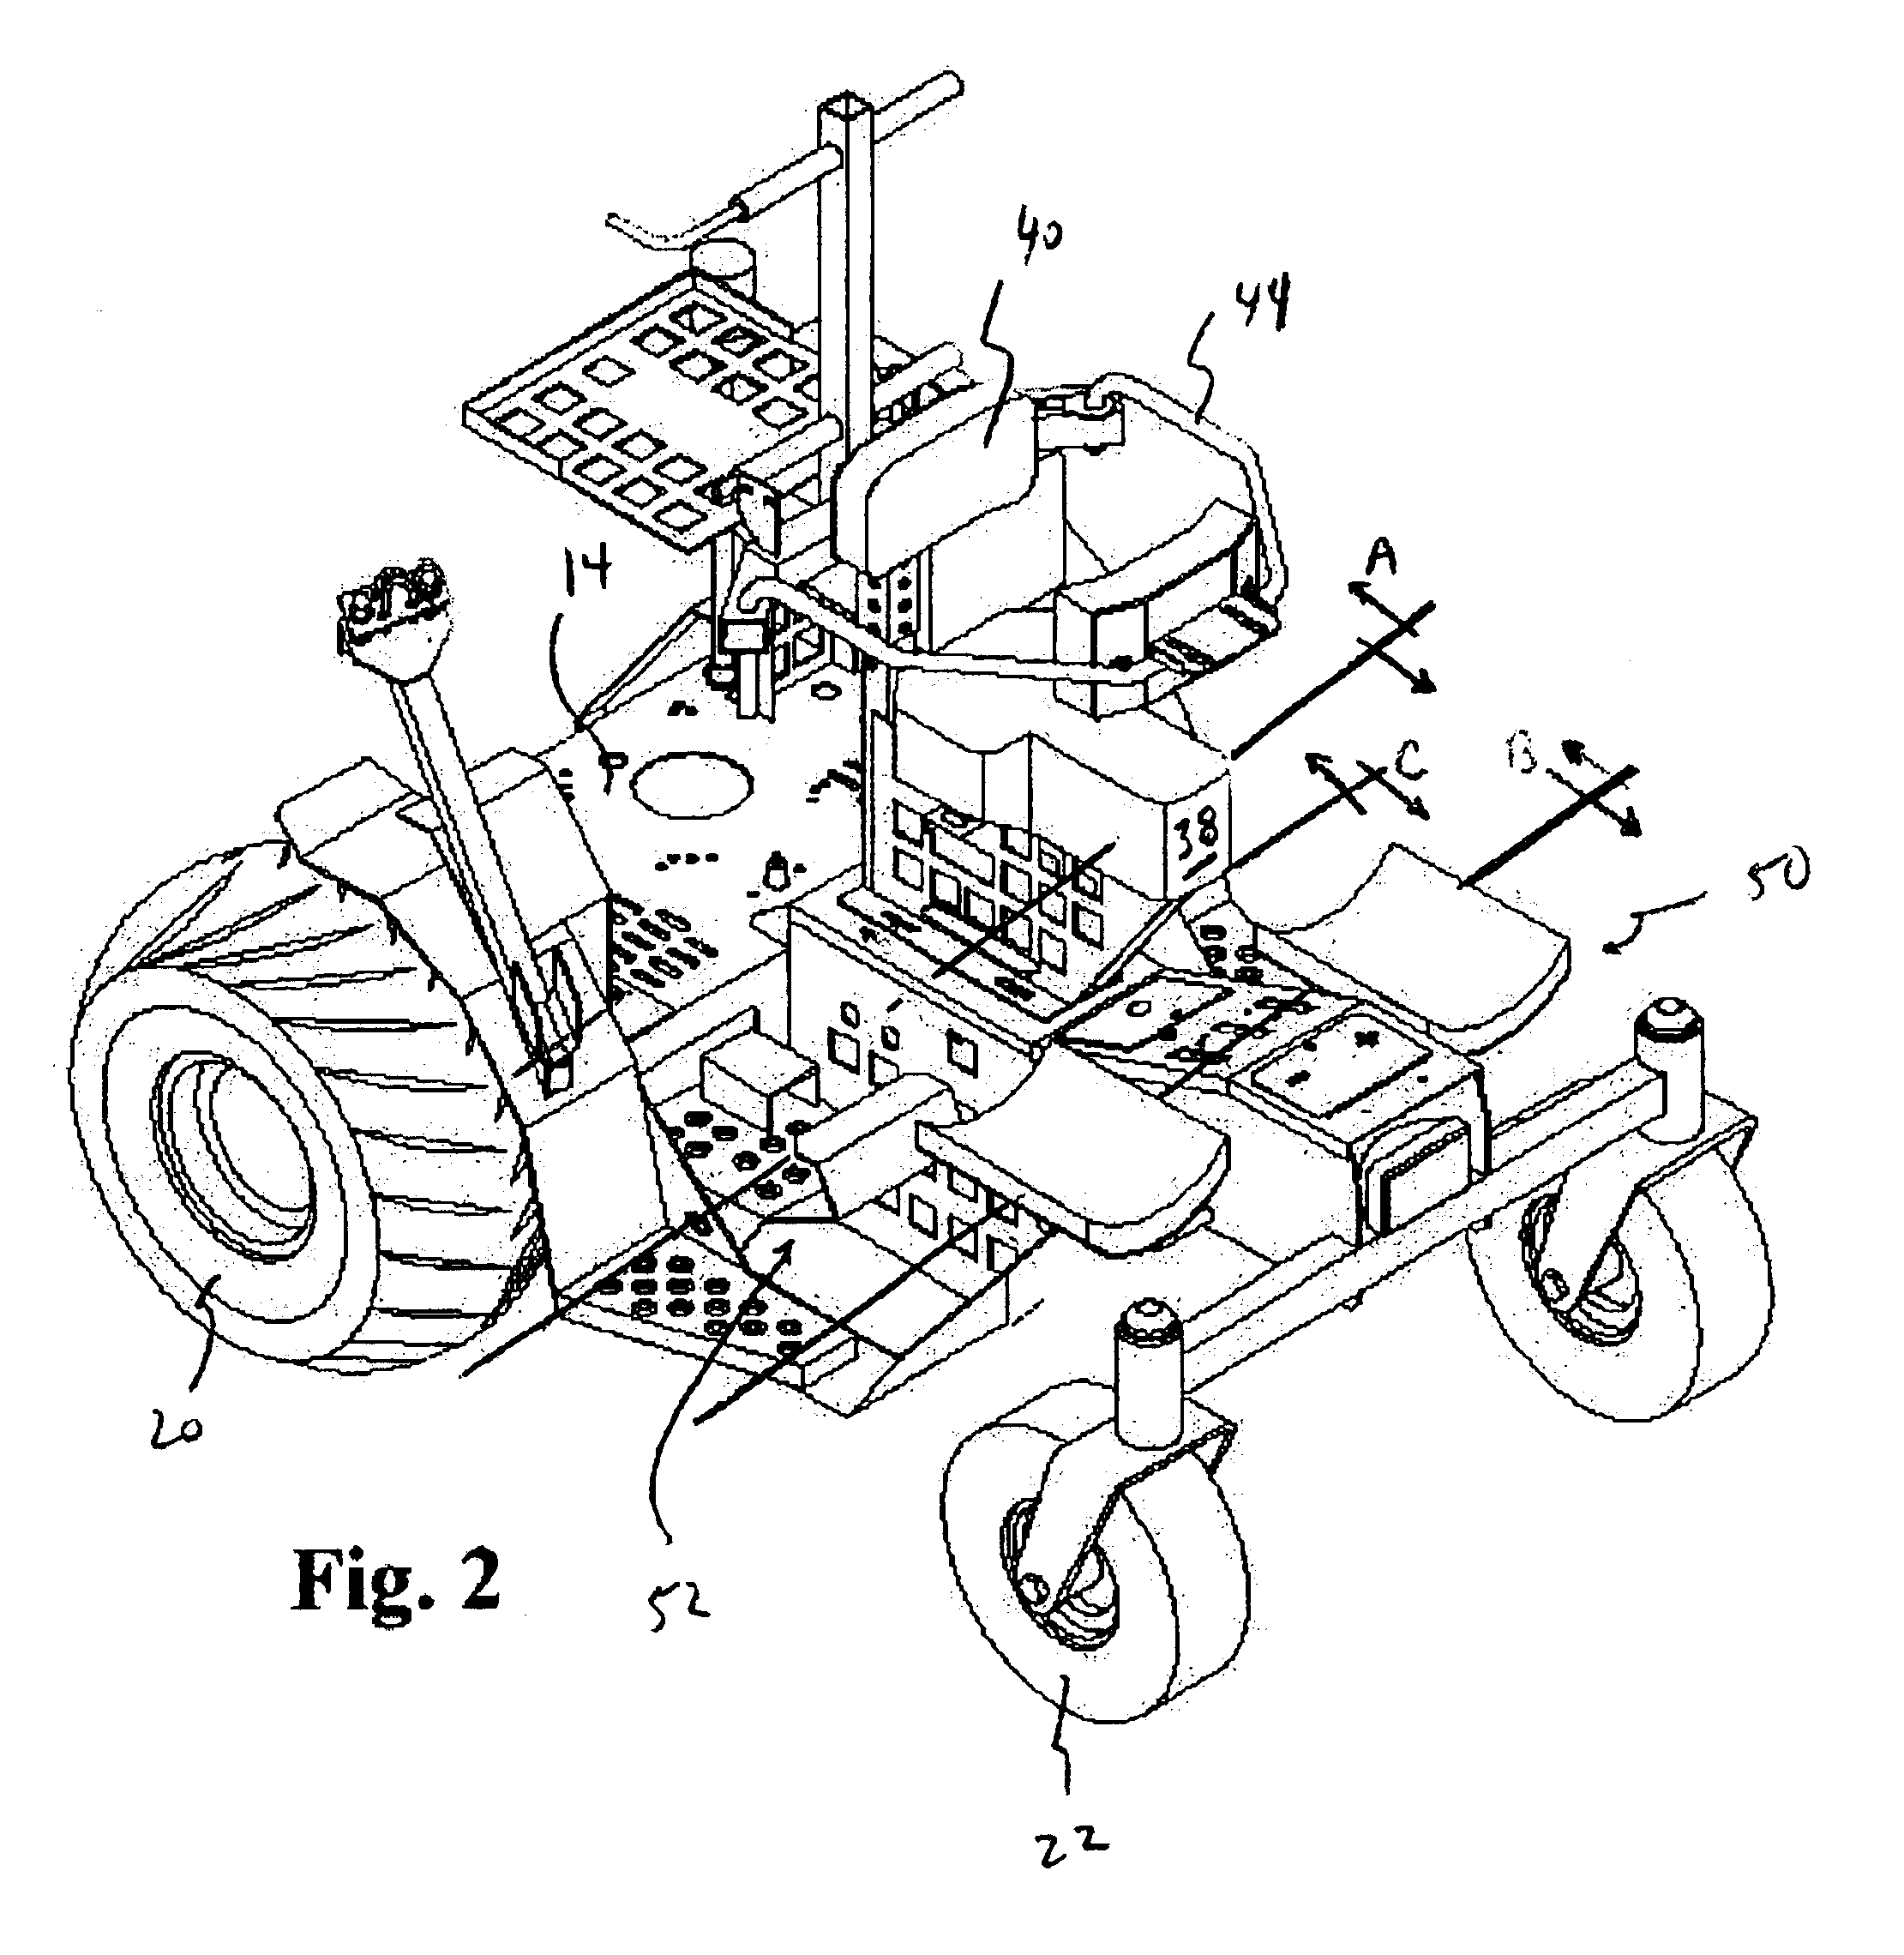 Utility vehicle with foot-controlled mobility